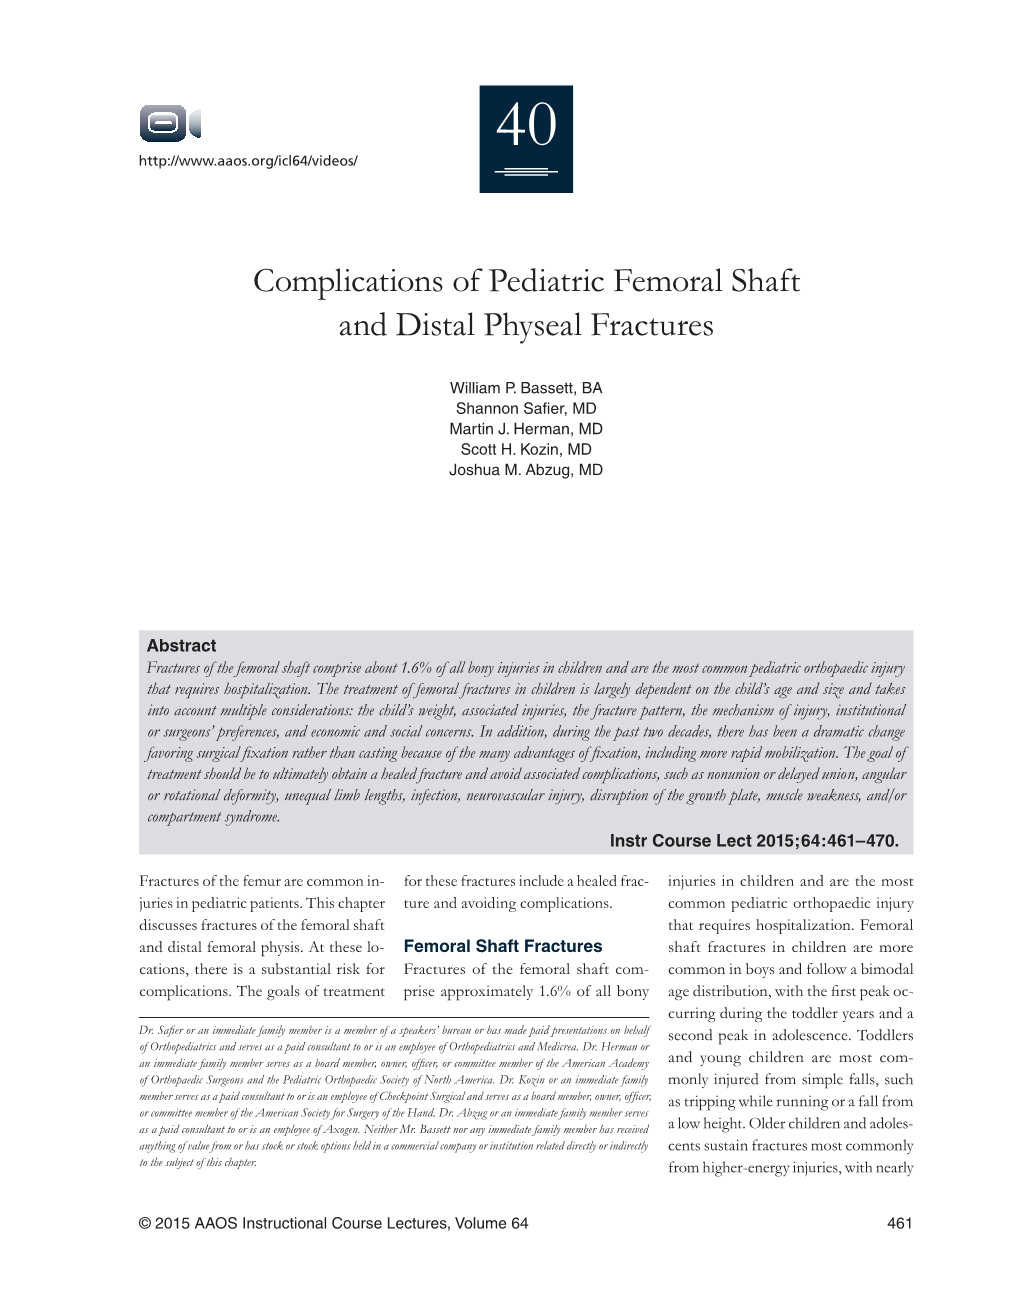 Complications of Pediatric Femoral Shaft and Distal Physeal Fractures